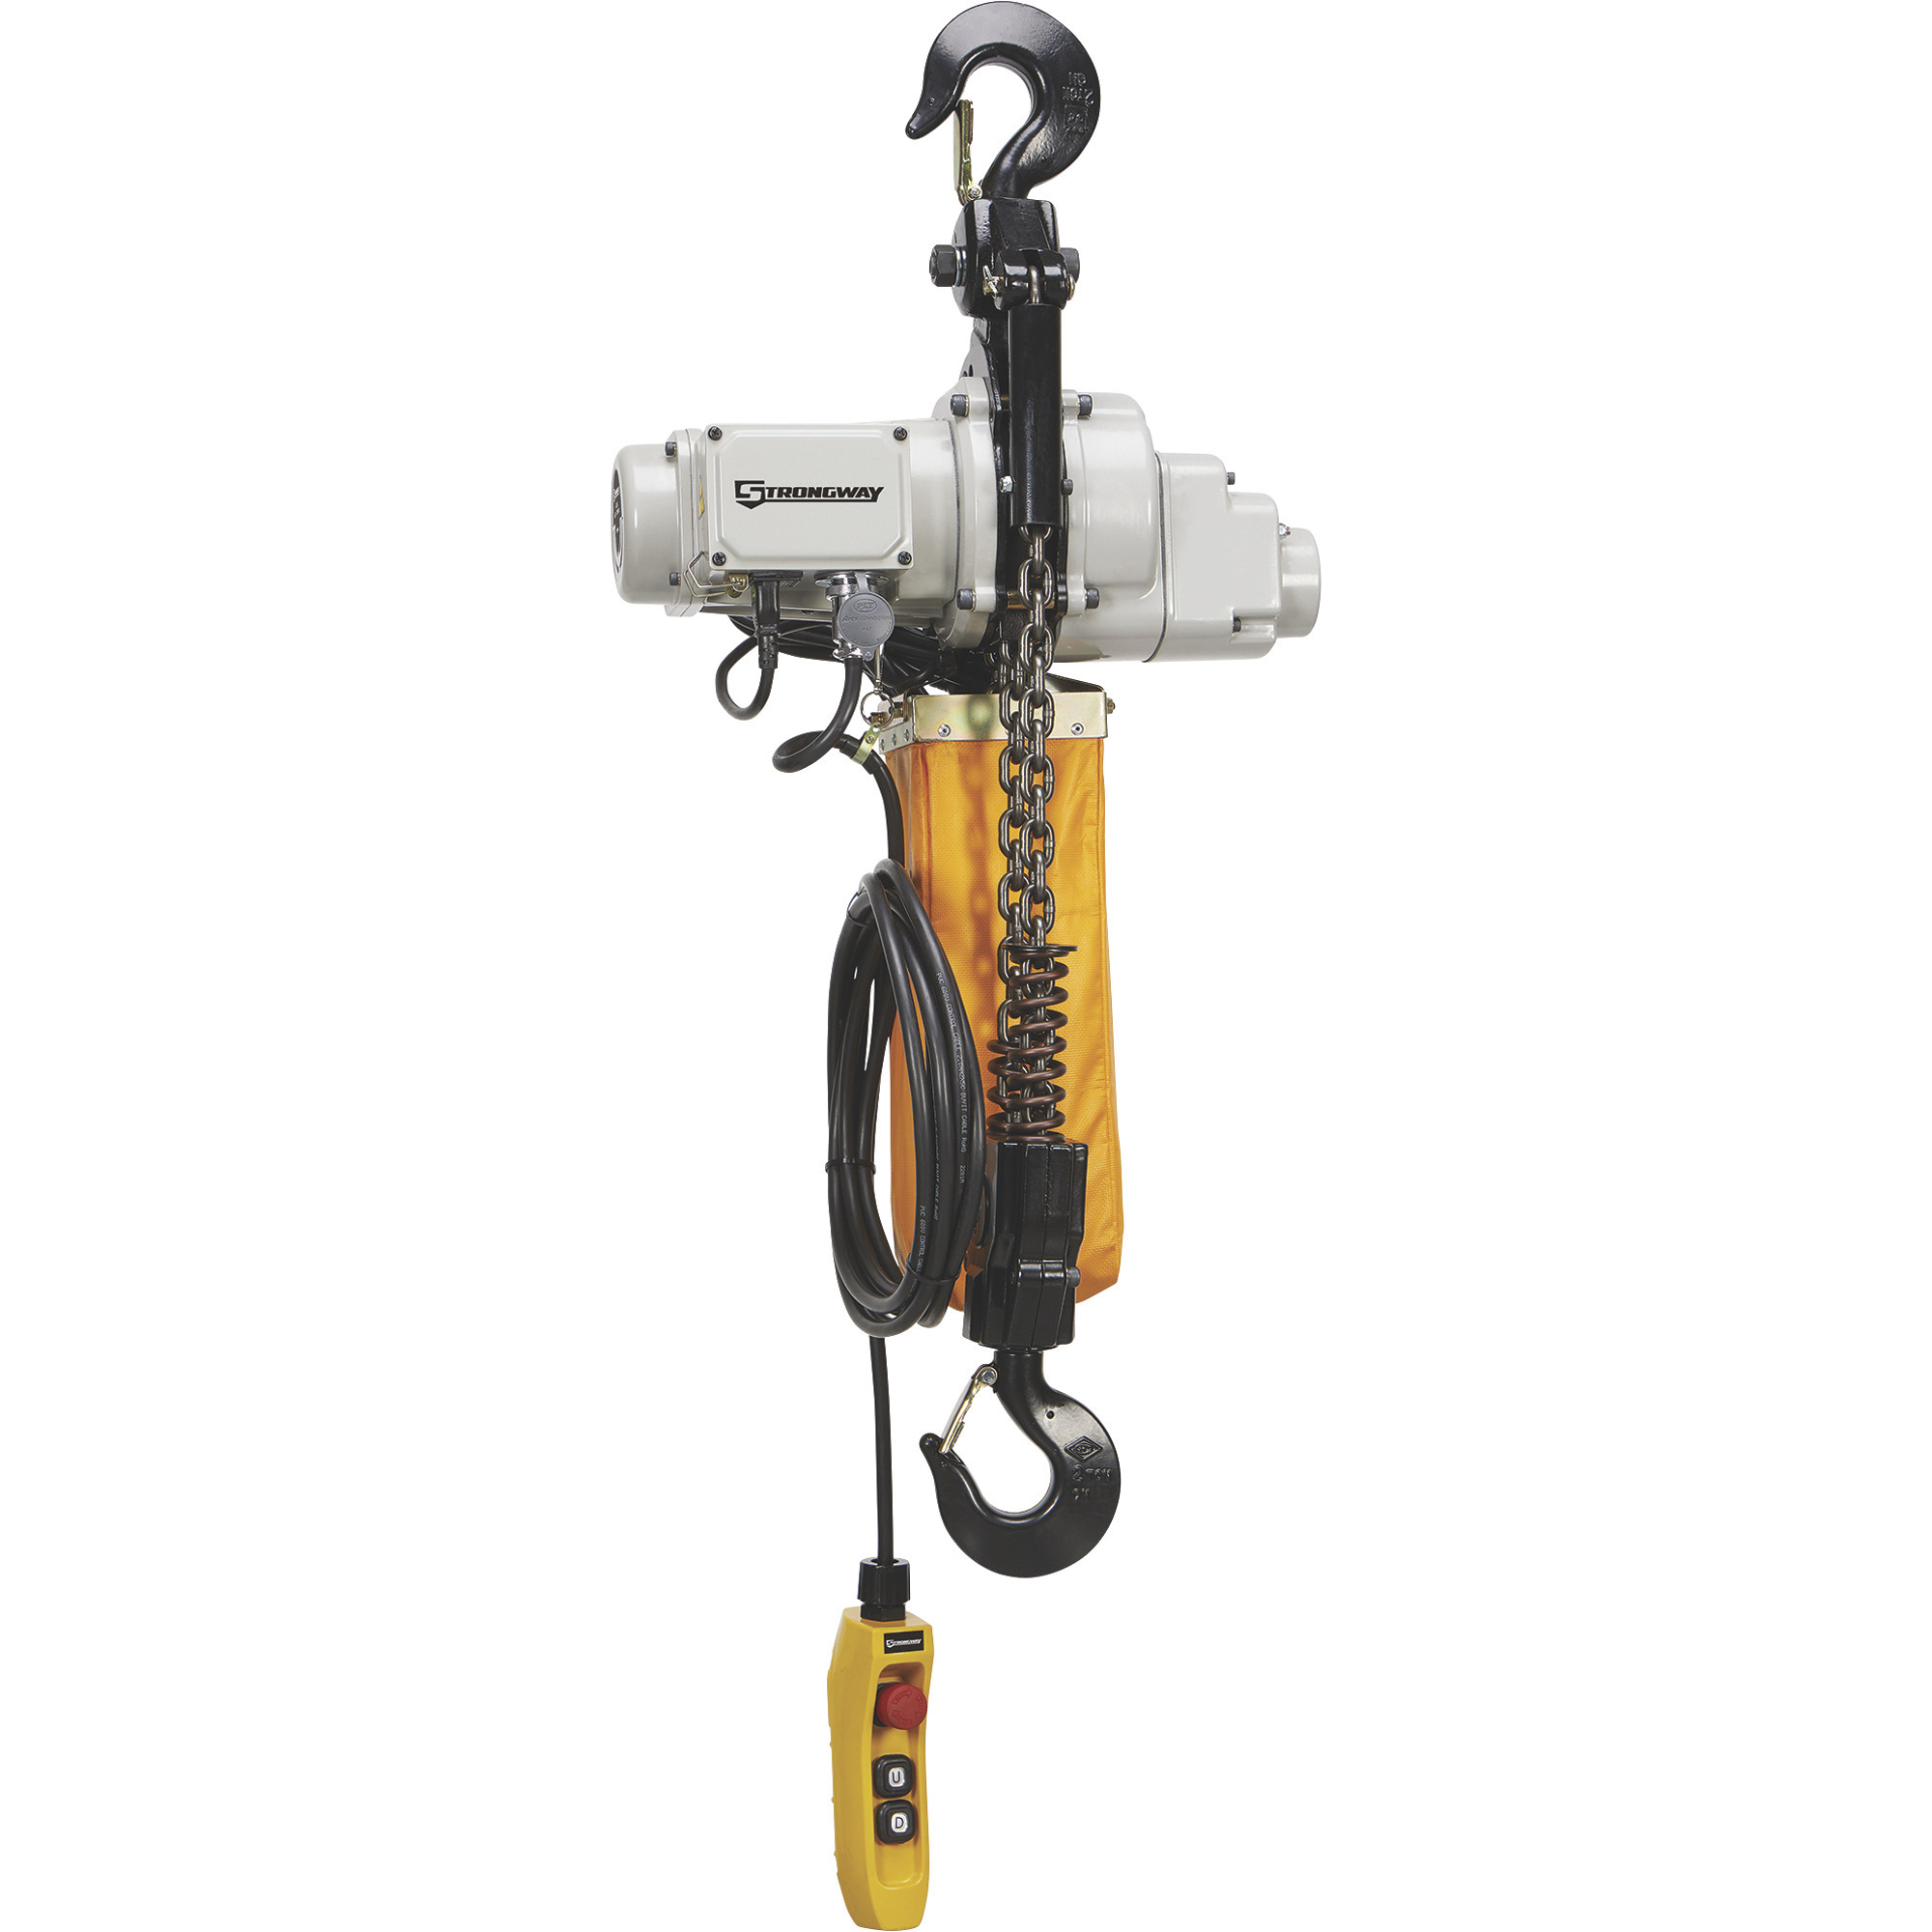 Strongway Electric Chain Hoist - 2-Ton Load Capacity, 9.84ft. Lift